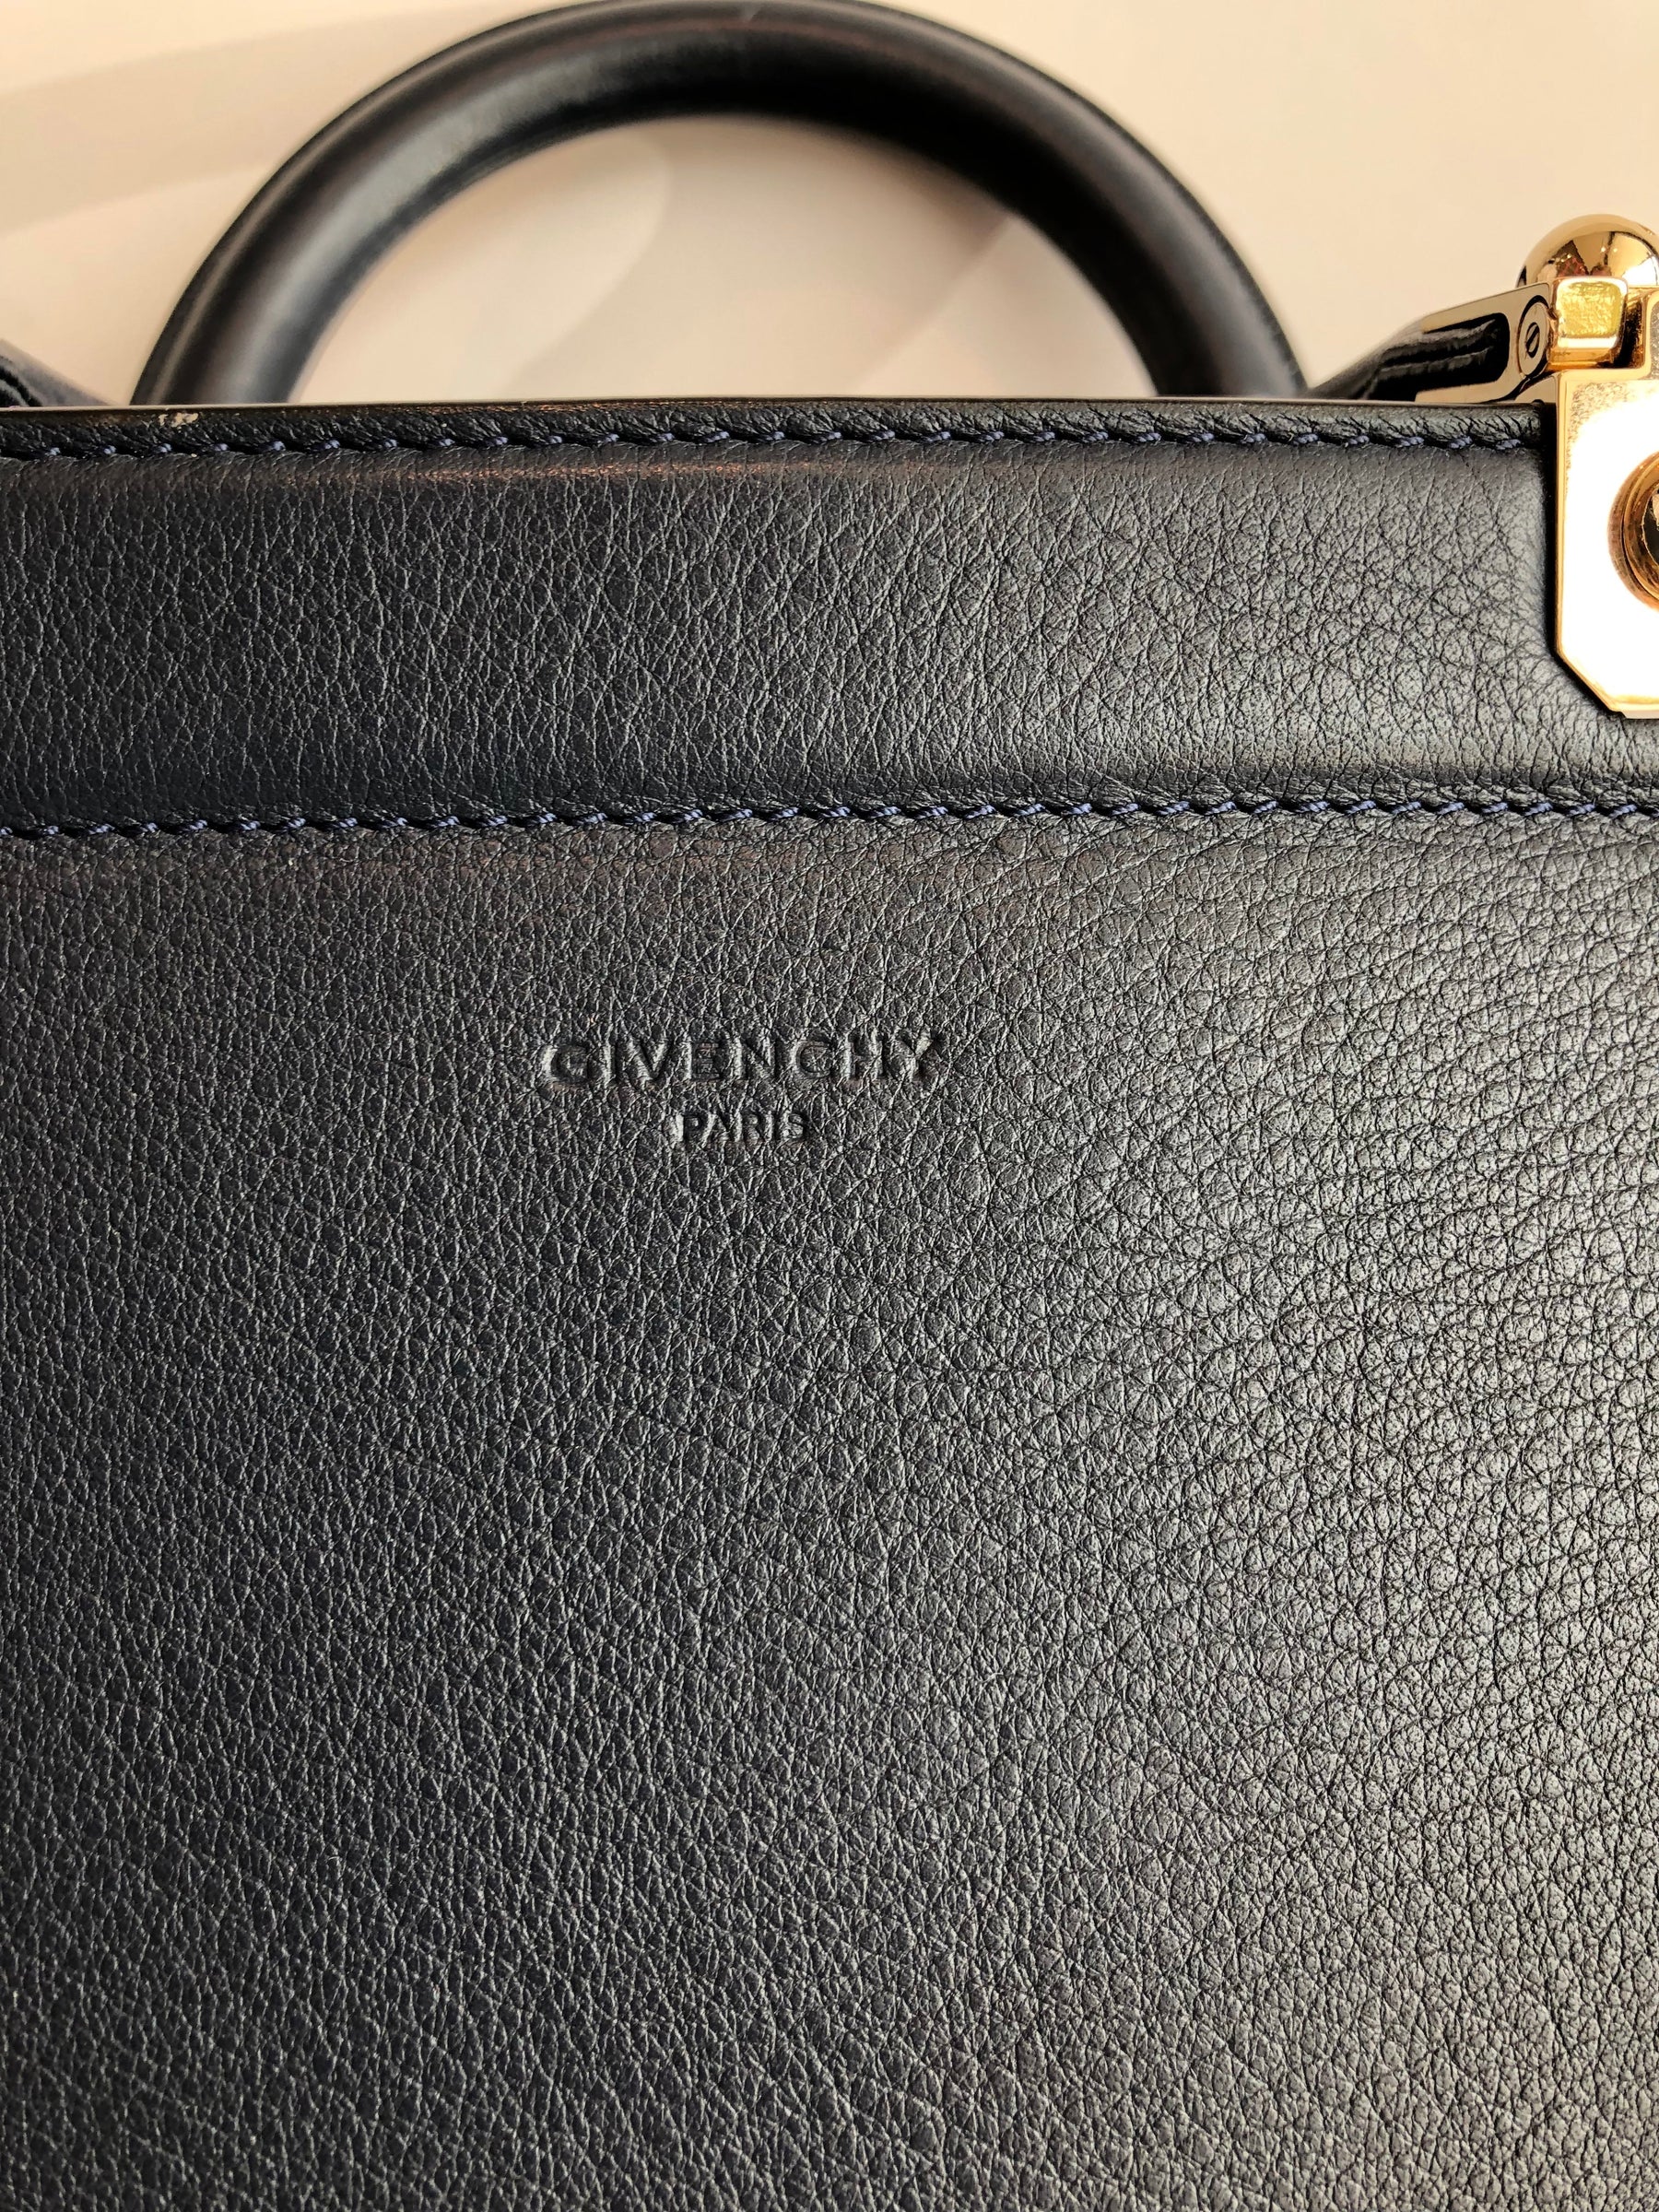 Givenchy HDG Top Handle Leather Tote Bag